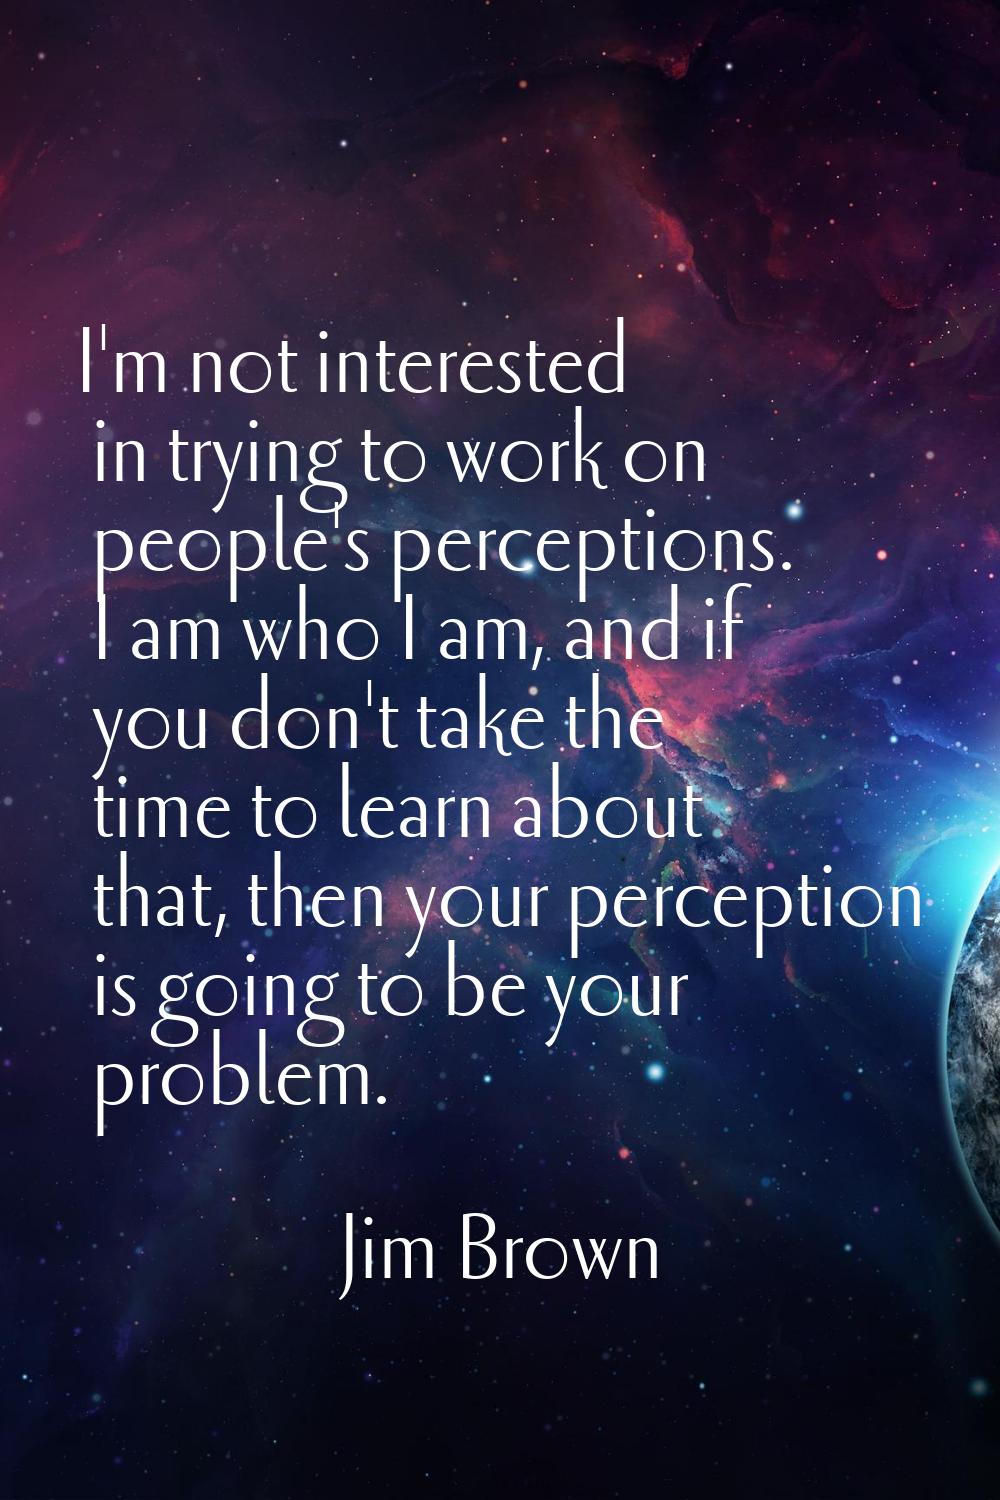 I'm not interested in trying to work on people's perceptions. I am who I am, and if you don't take 